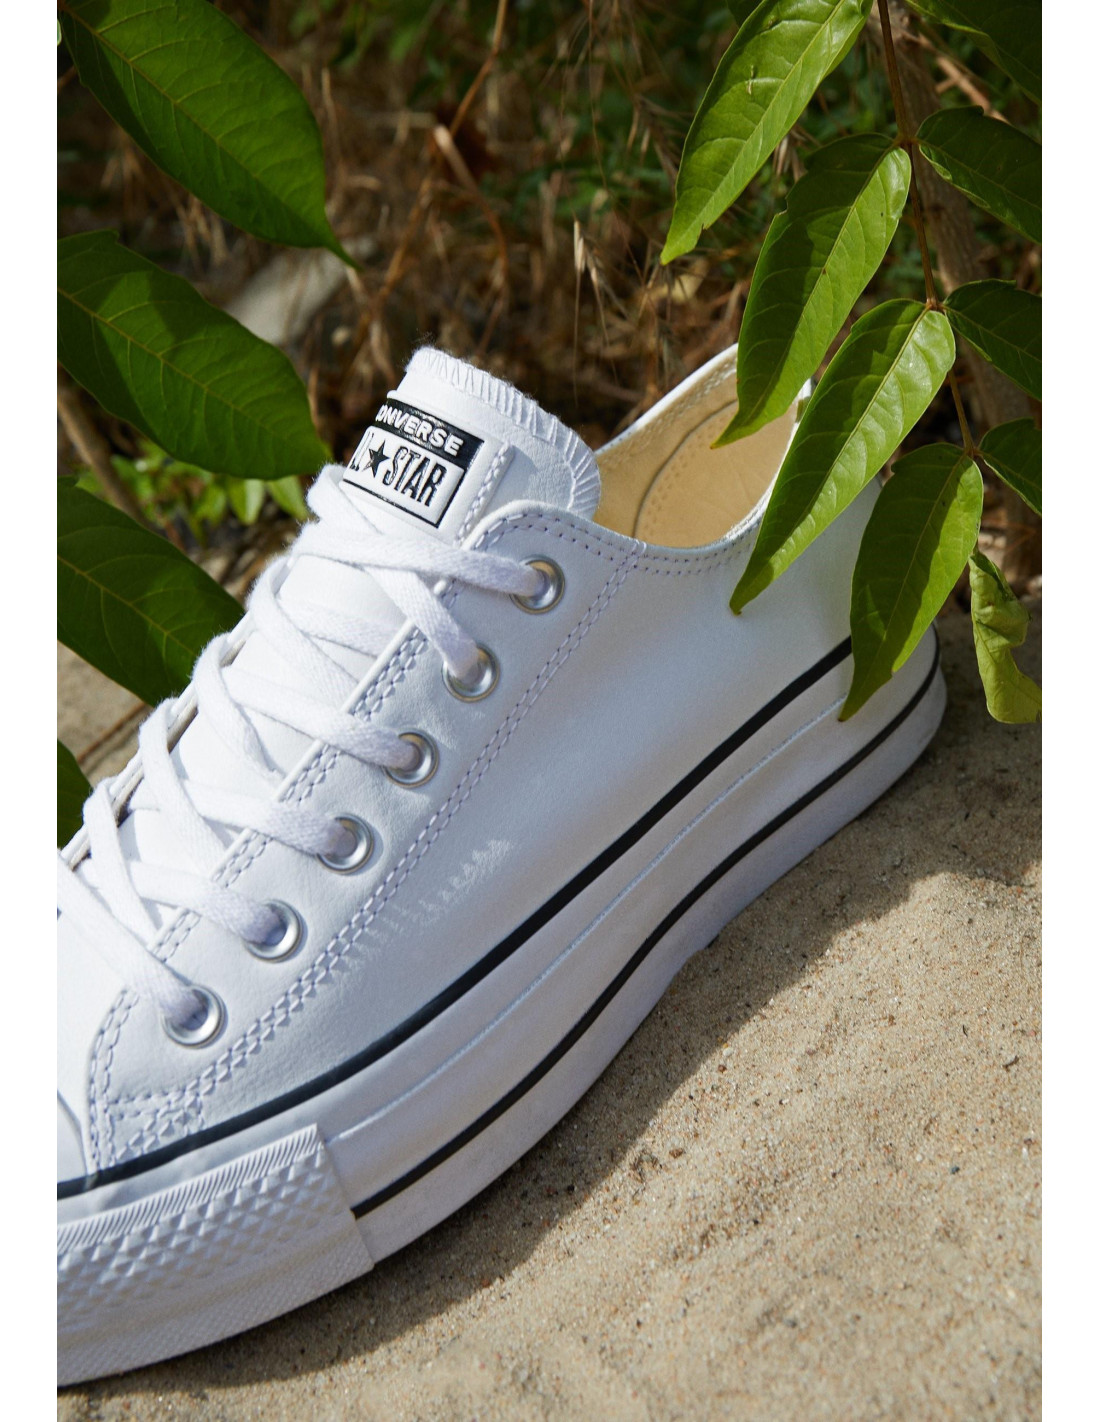 Converse Chuck Taylor All Star Platform Clean Leather